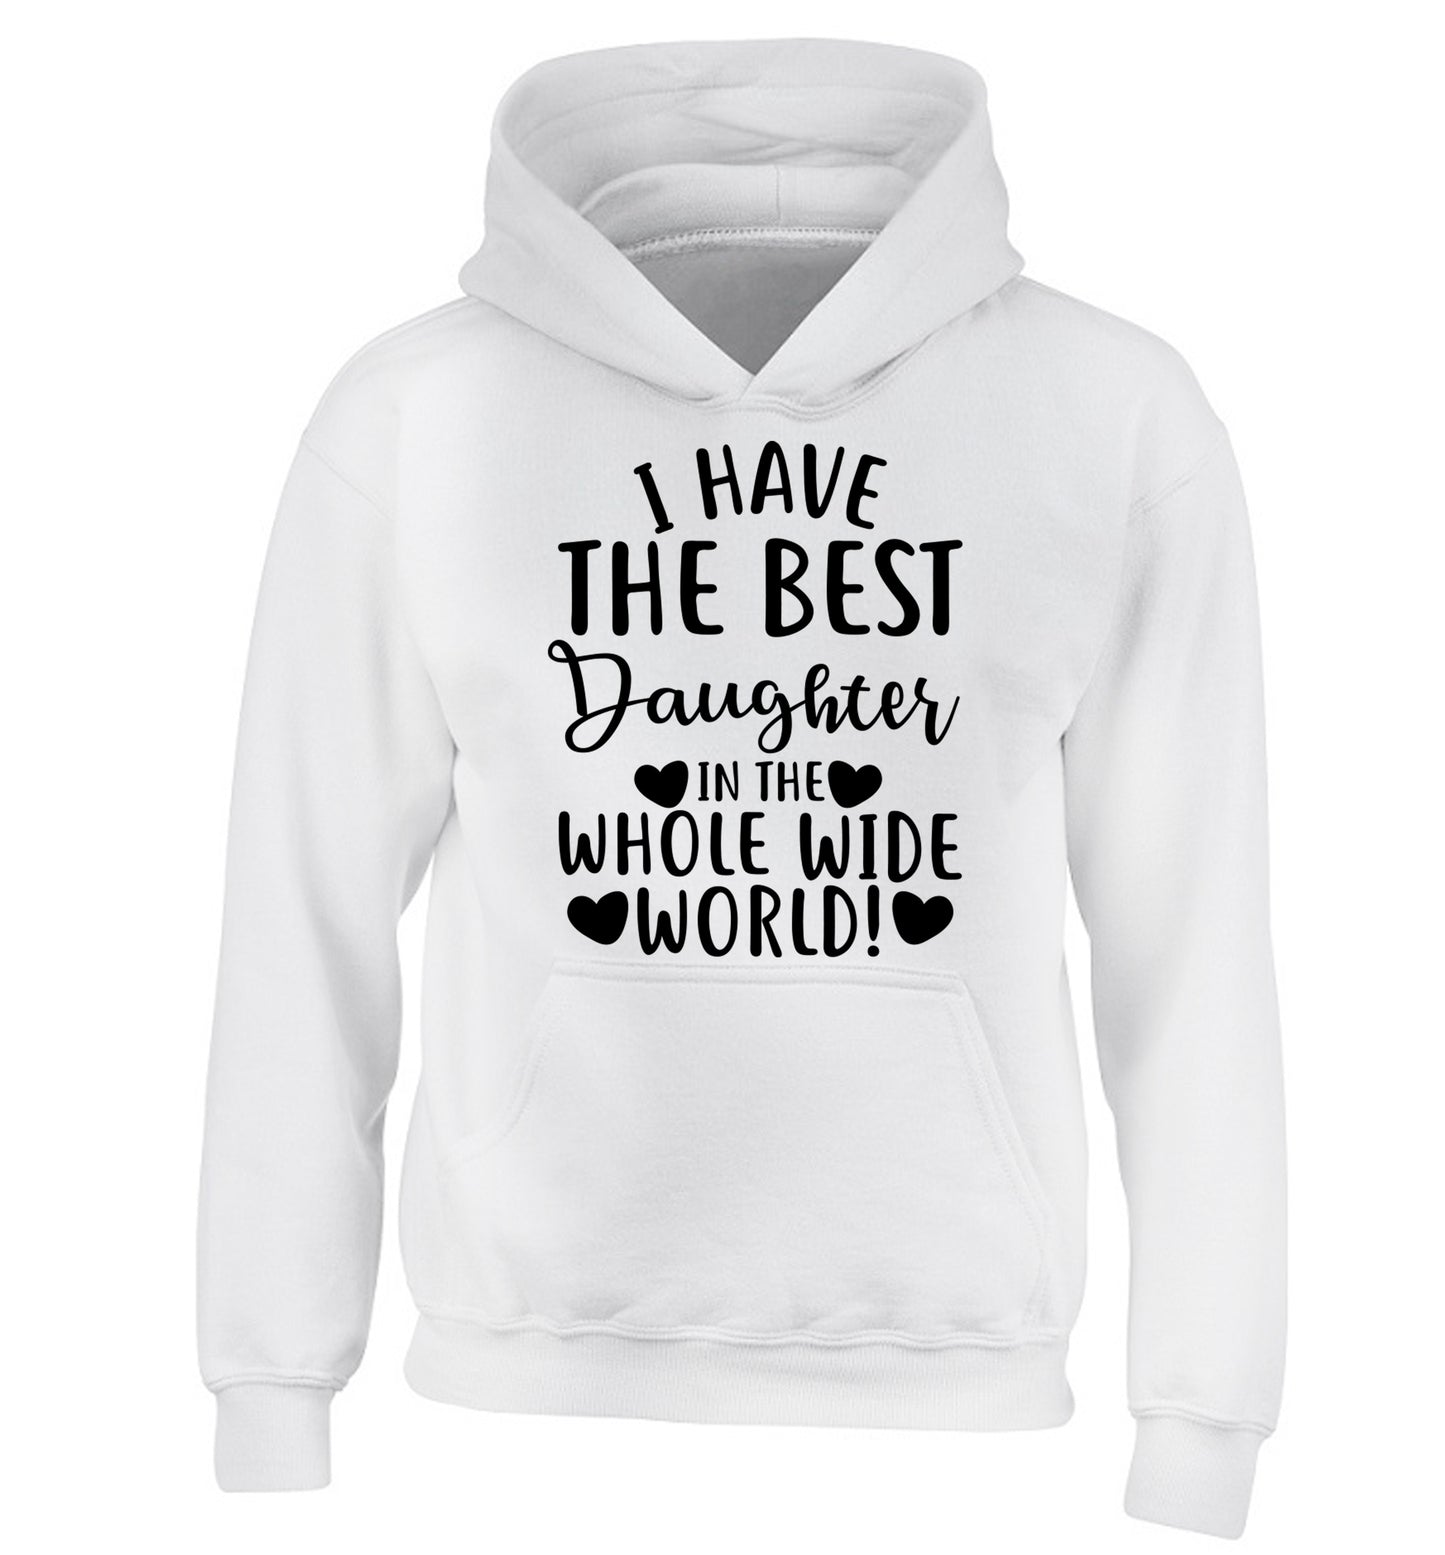 I have the best daughter in the whole wide world! children's white hoodie 12-13 Years